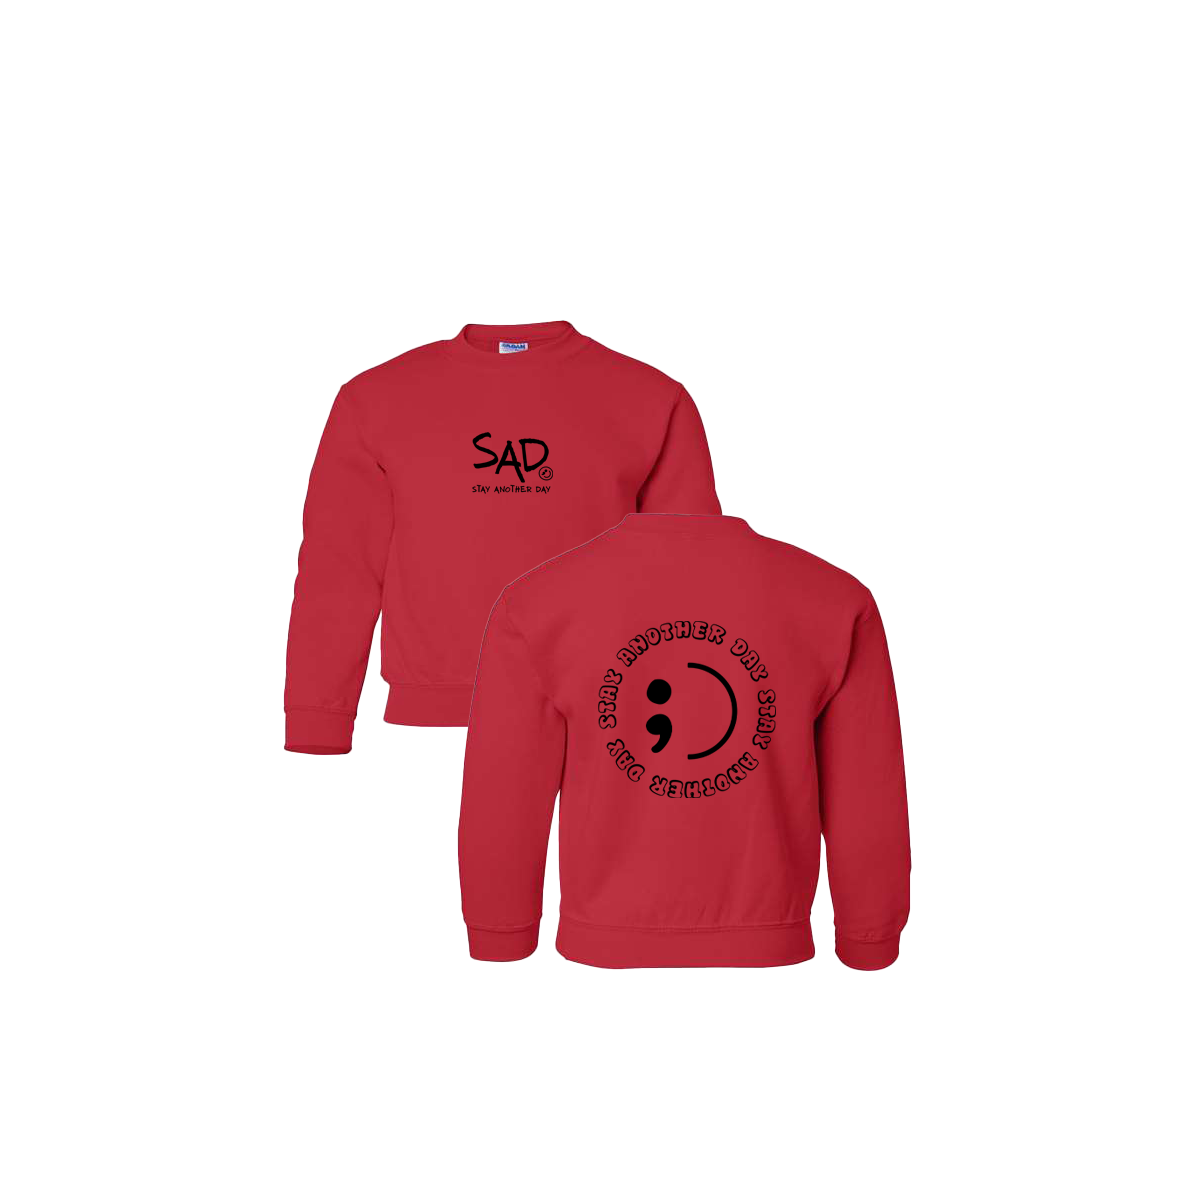 Stay Another Day Circle Screen Printed Red Youth Crewneck